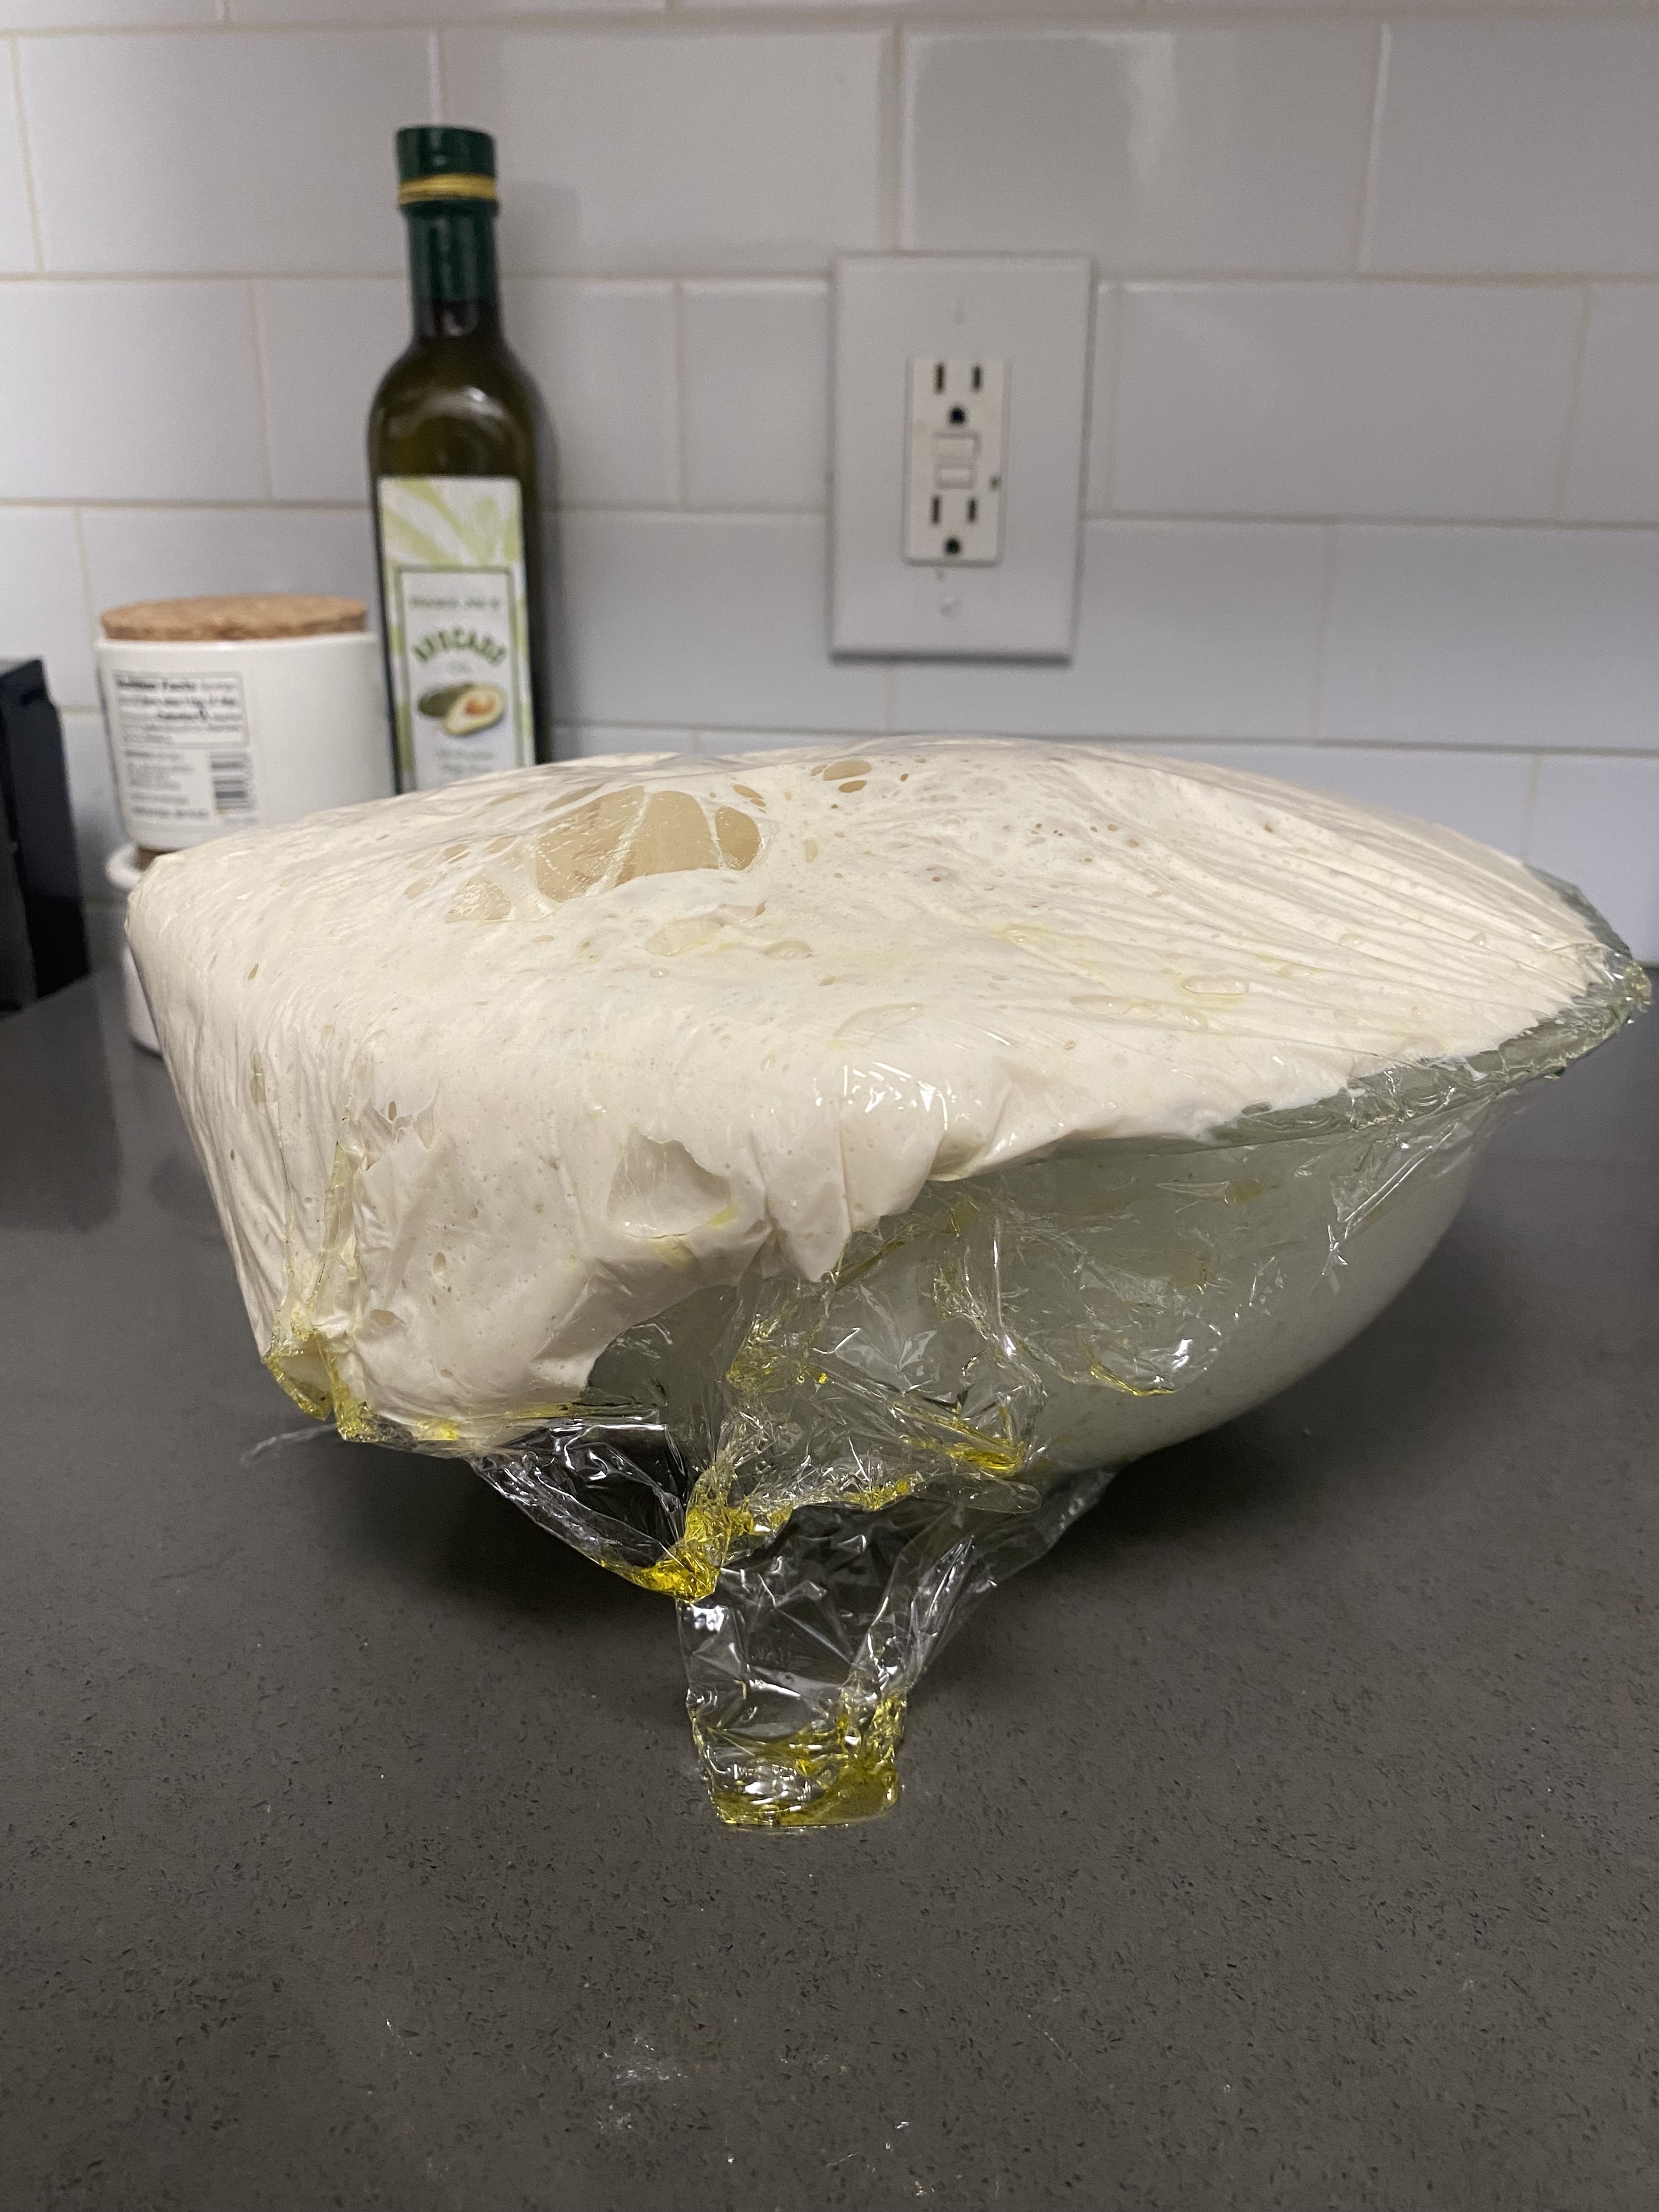 Overflowing dough in a plastic bowl